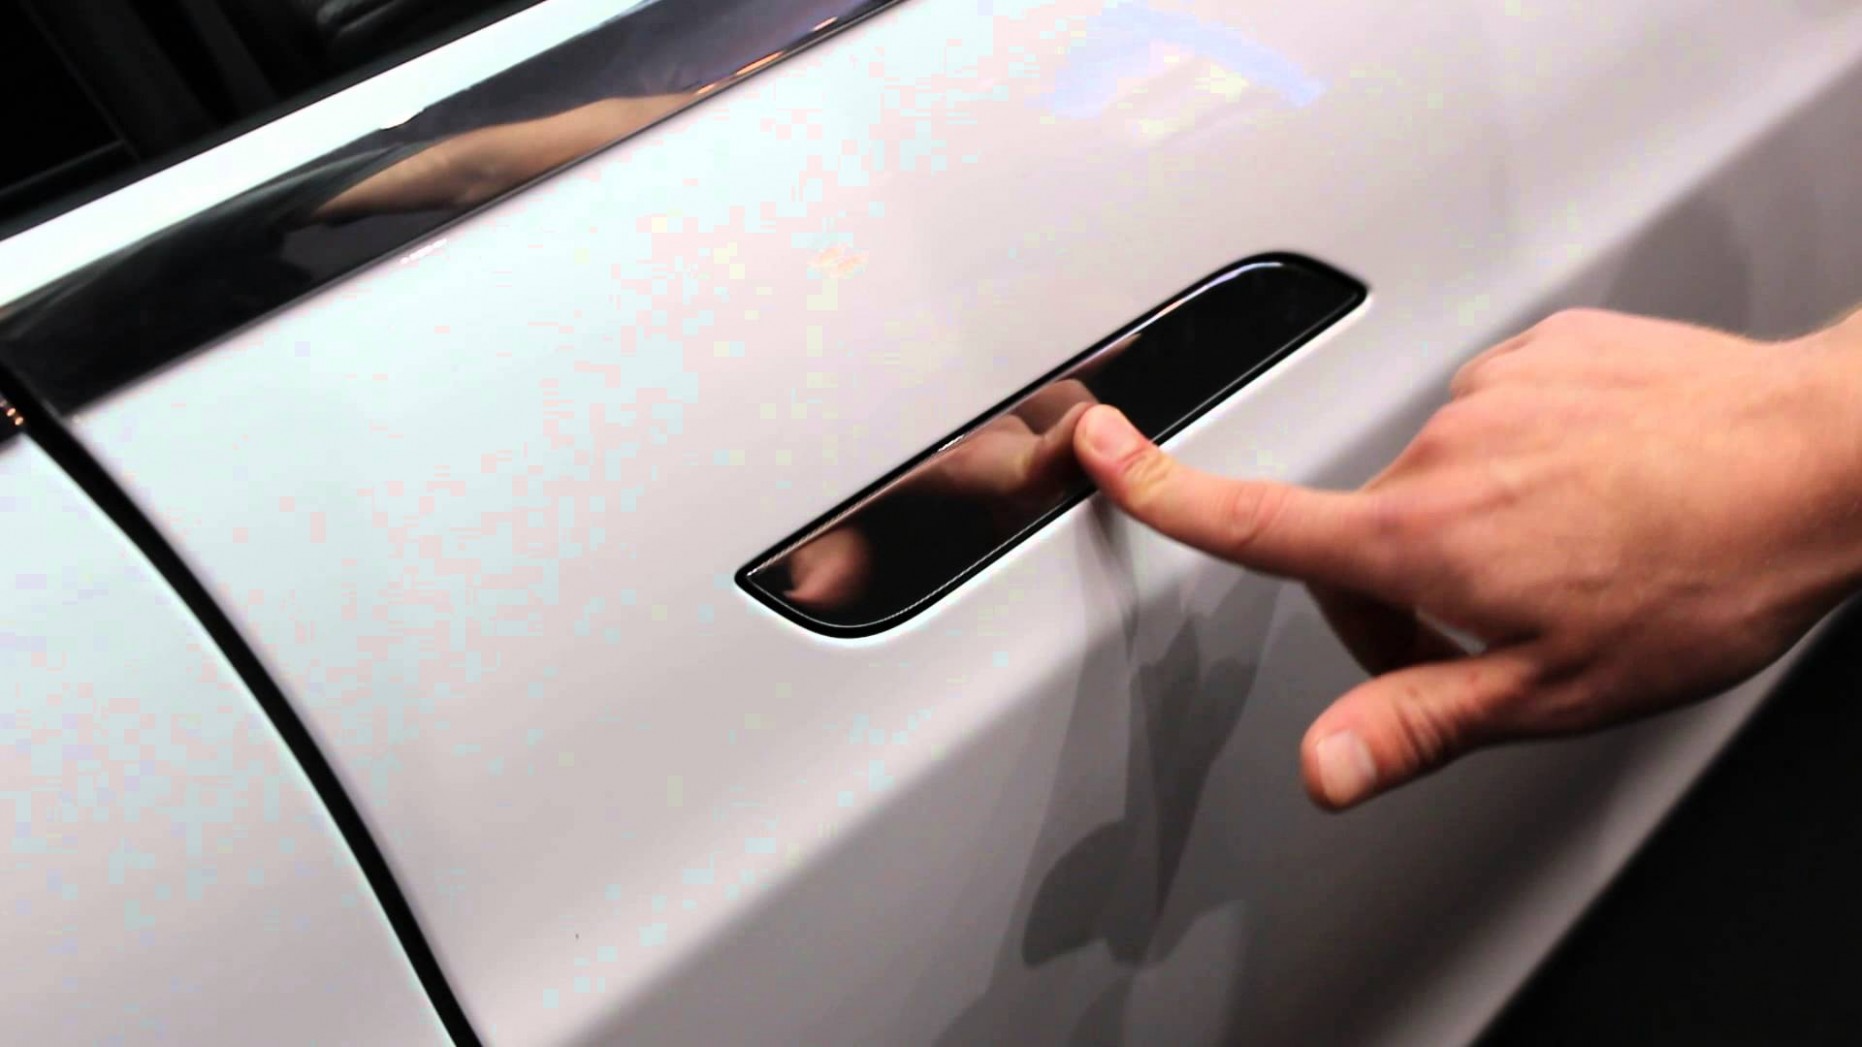 Tesla Door Handle Problem are Keeping Owners Locked Out